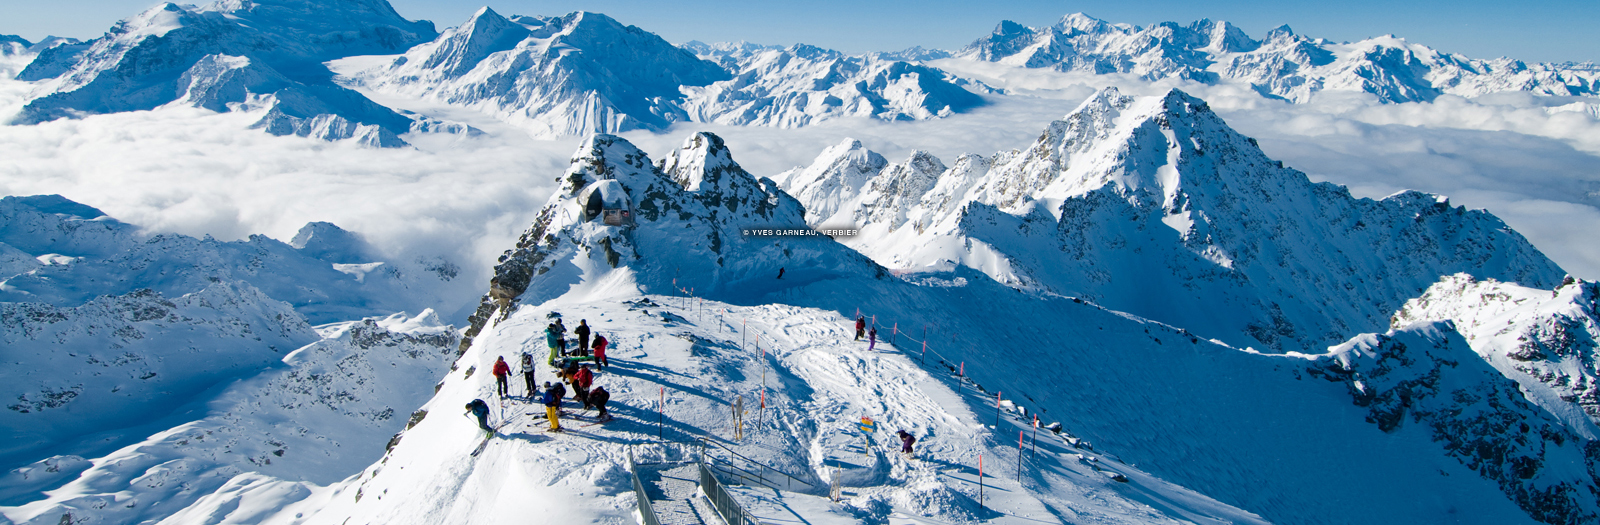 Verbier Vacation Package, switzerland, alps, vacation